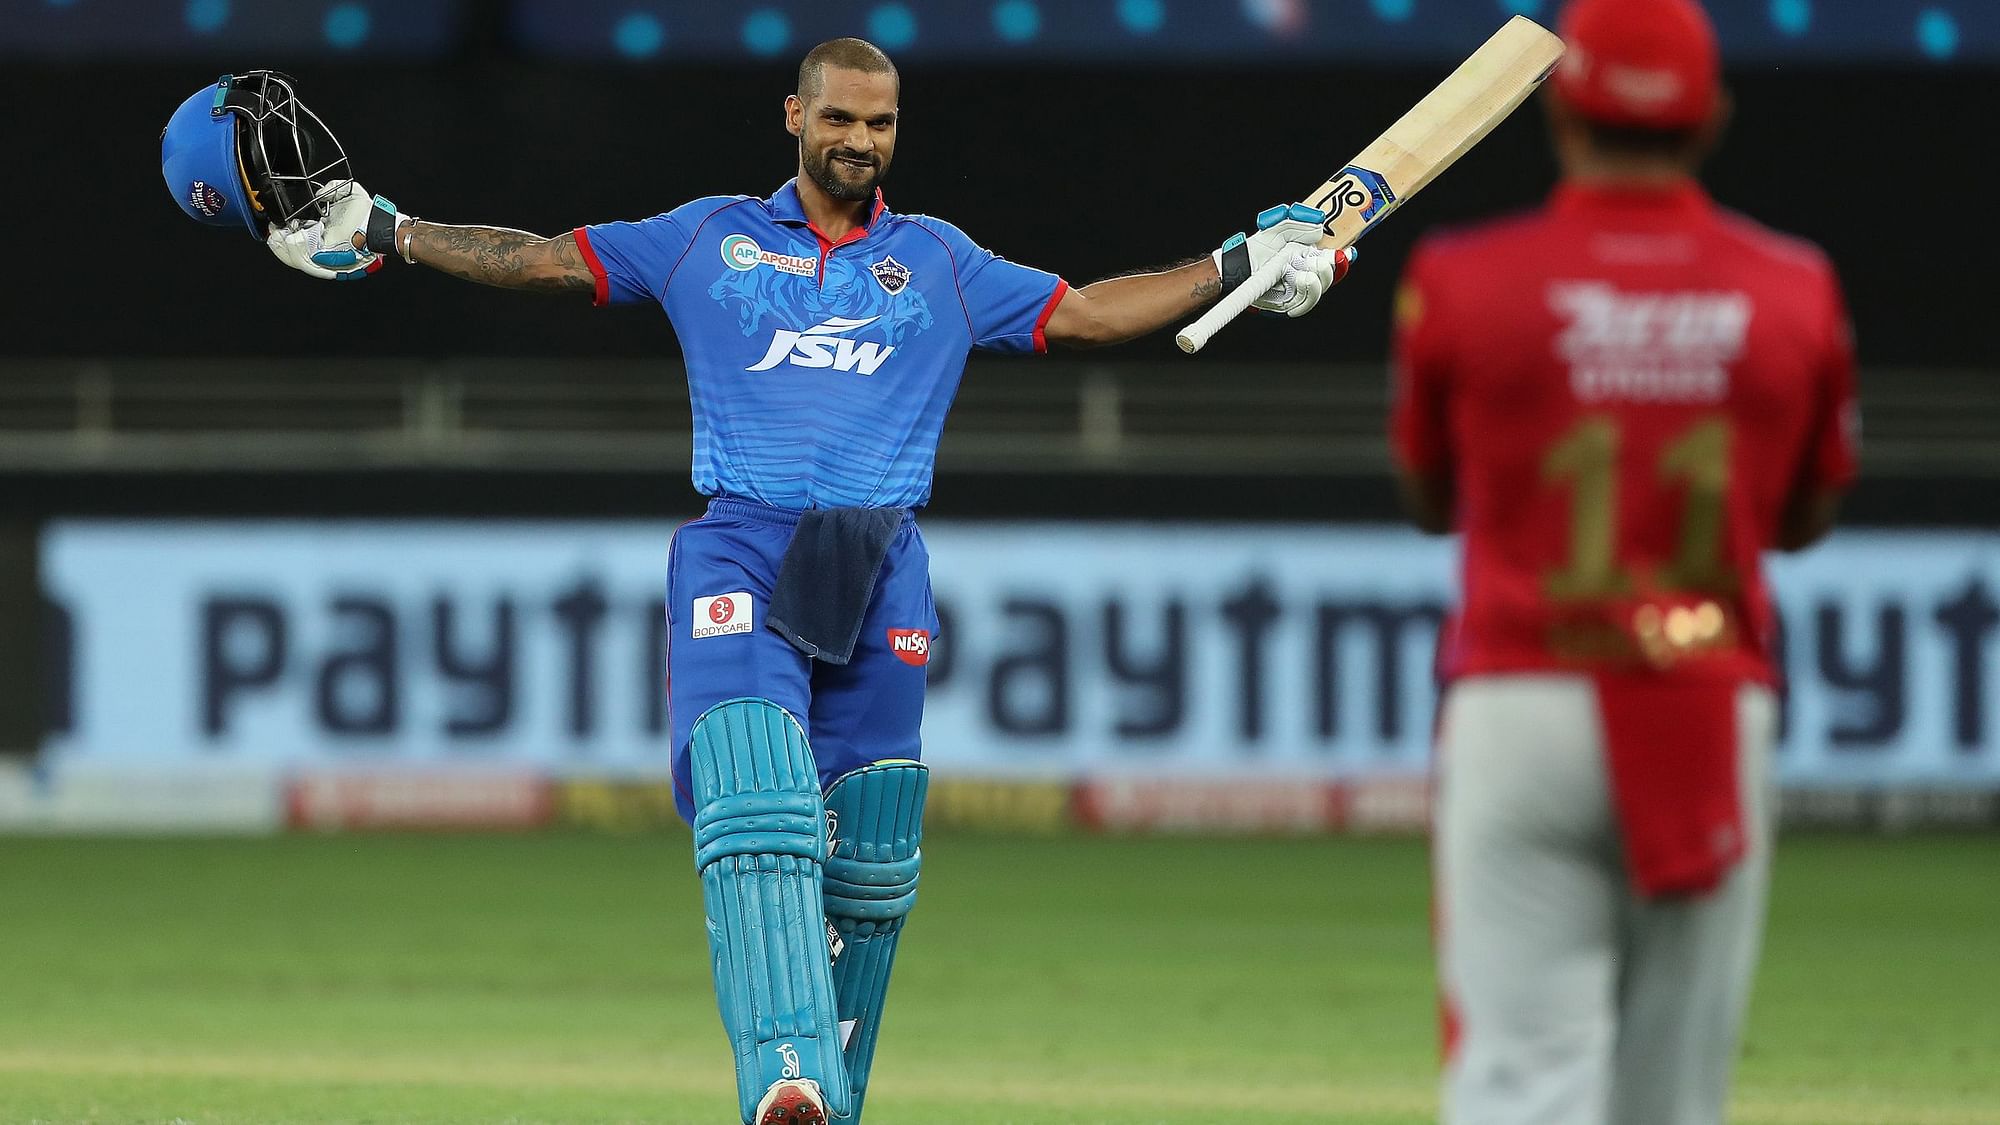 Shikhar Dhawan became the first batsman in IPL to score consecutive centuries in IPL. He scored 106 not out vs KXIP.